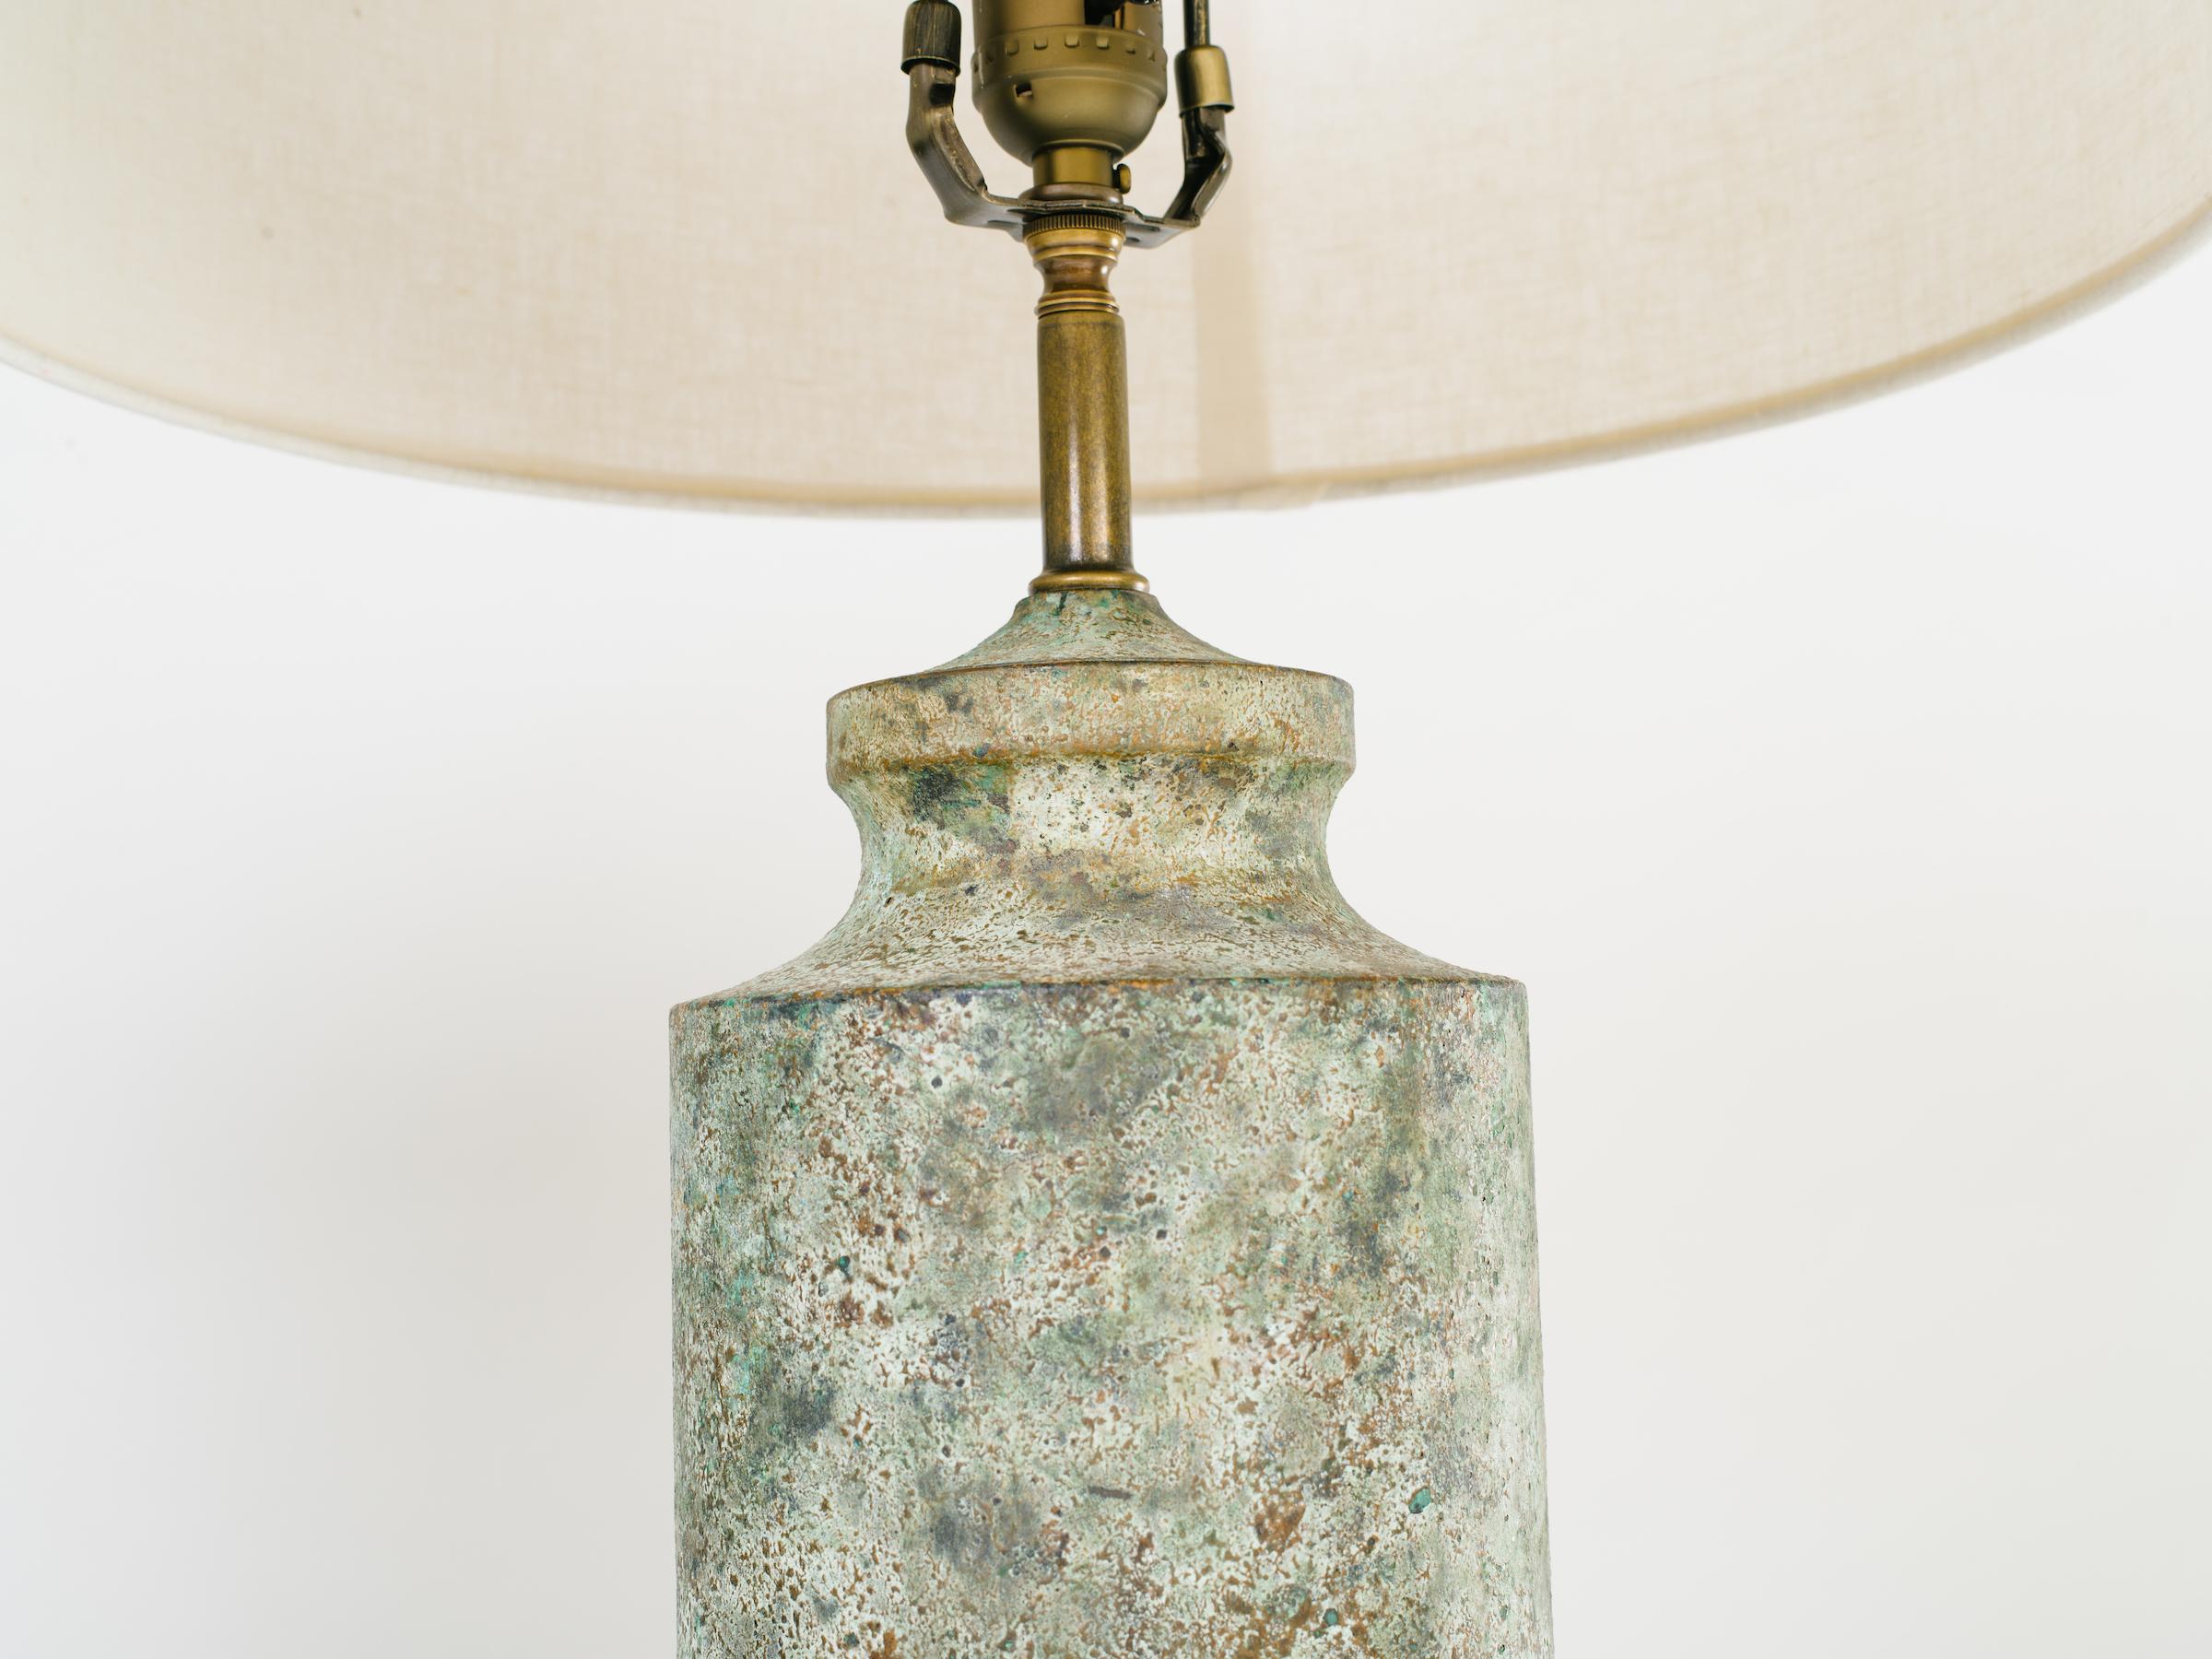 Pair of Mid-Century Modern Brutalist Lamps in Distressed Oxidized Metal 1